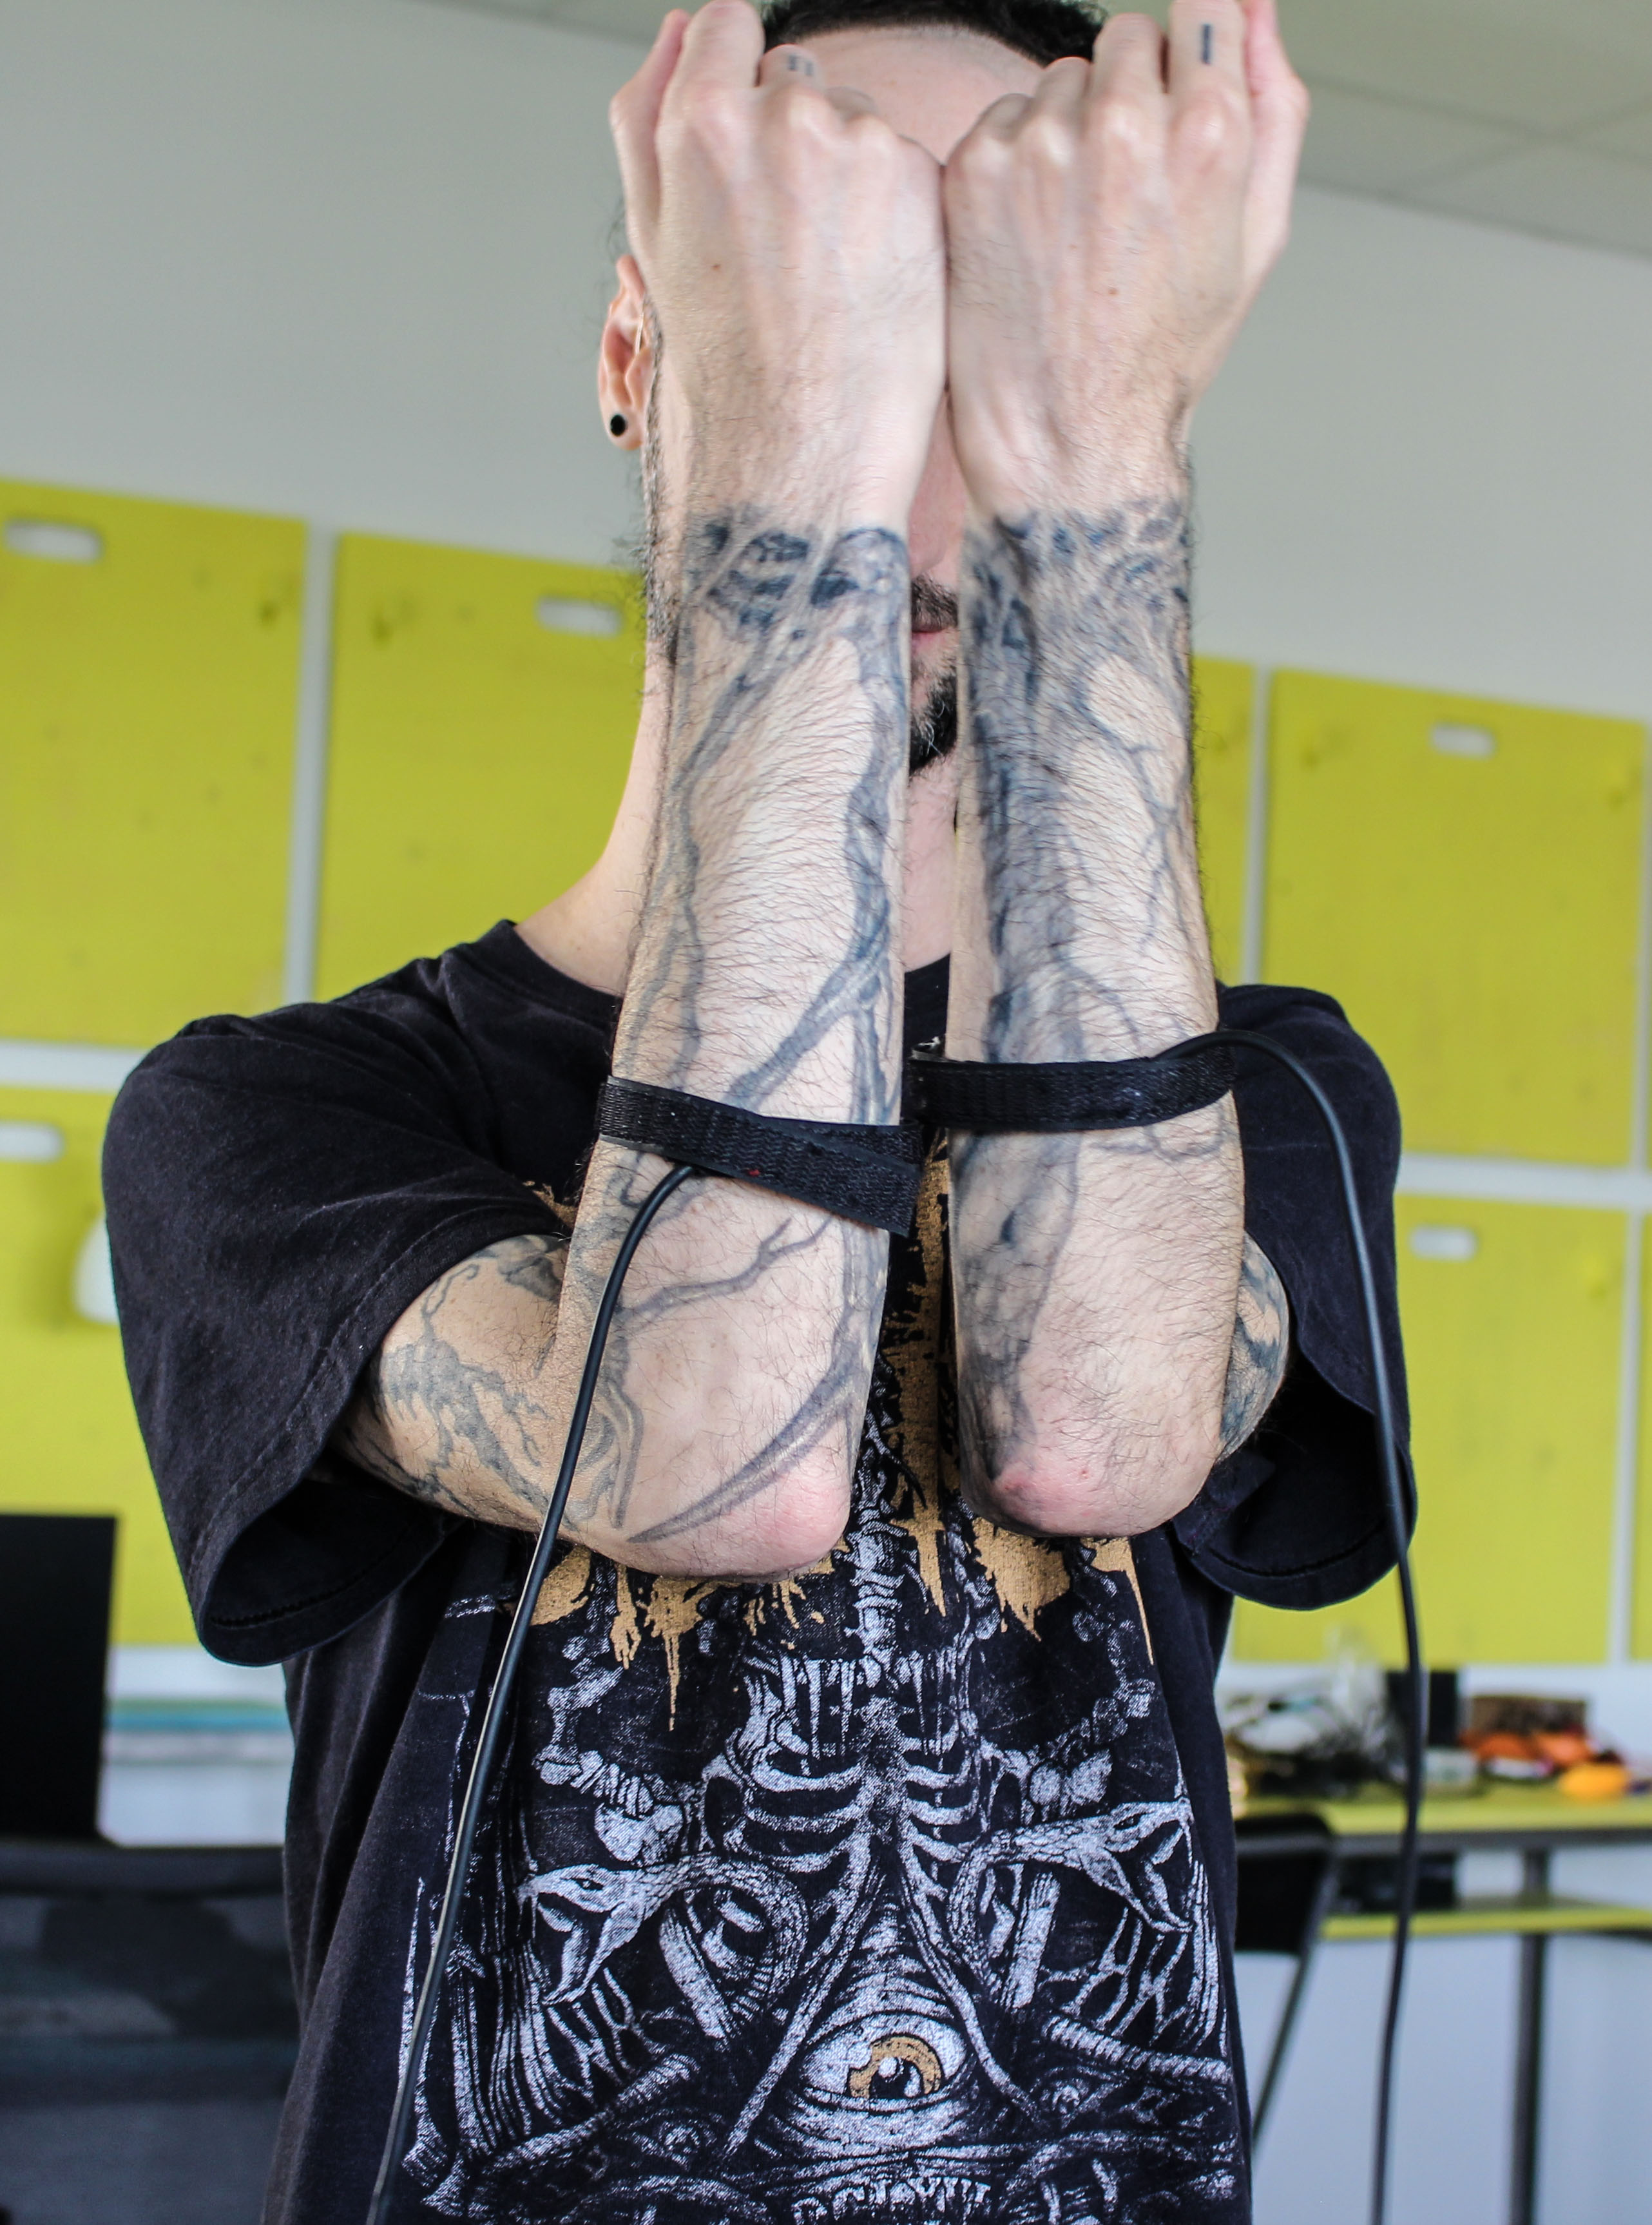 A person holding tattoo covered arms in front of their face, sensors are attached to their arms.